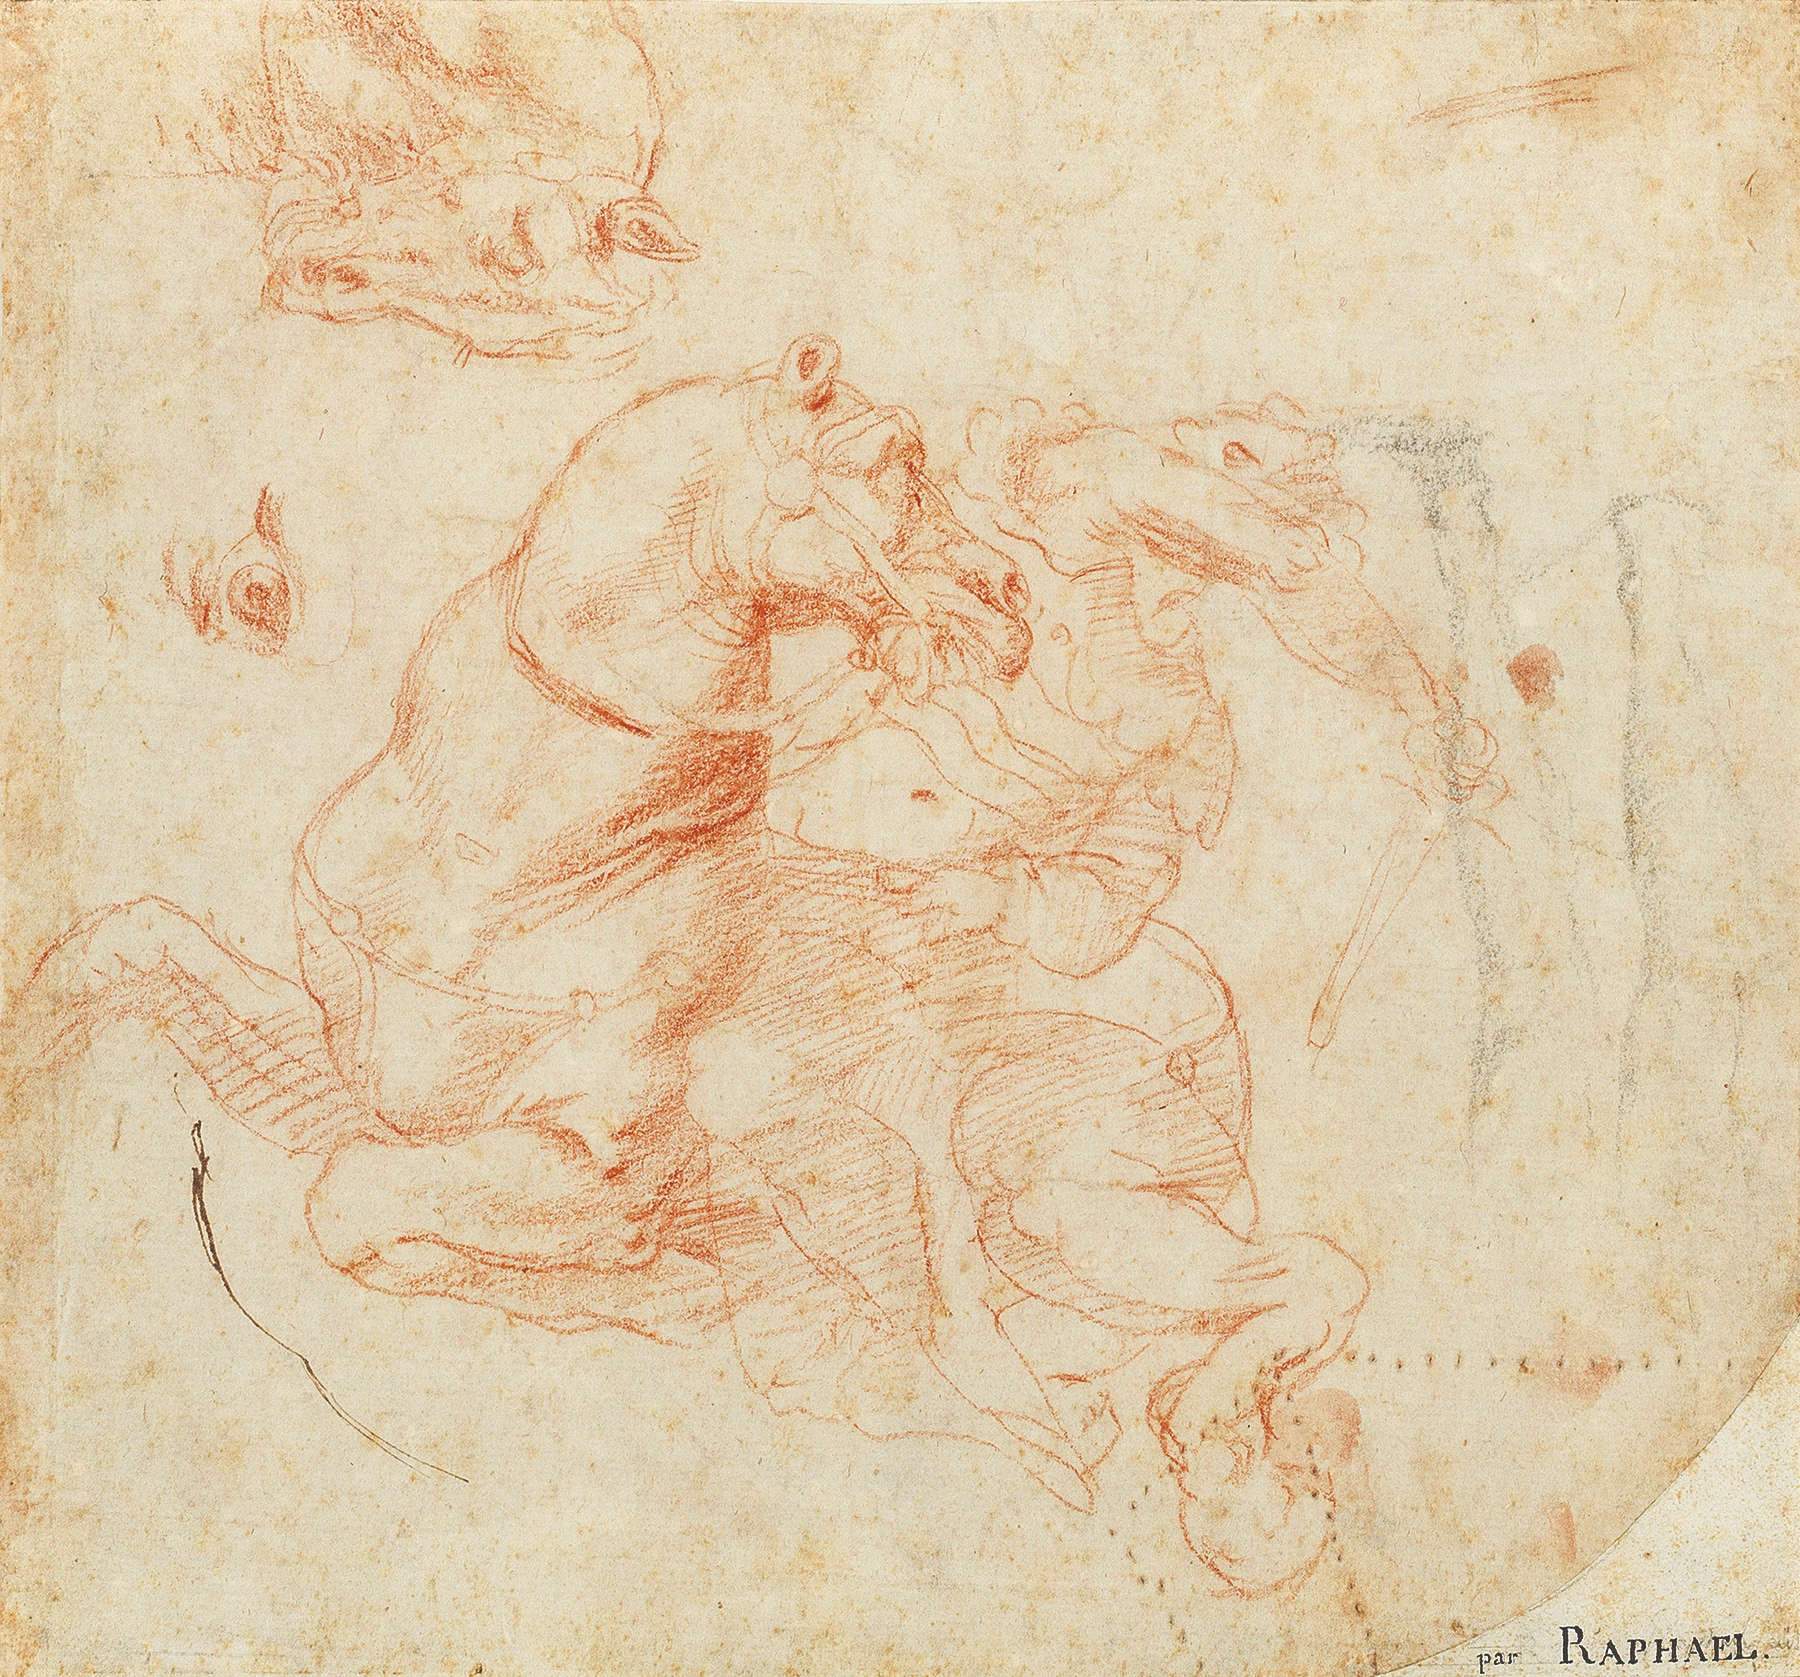 Rare and valuable drawing by Raphael for the Vatican Stanze discovered. It will go to auction